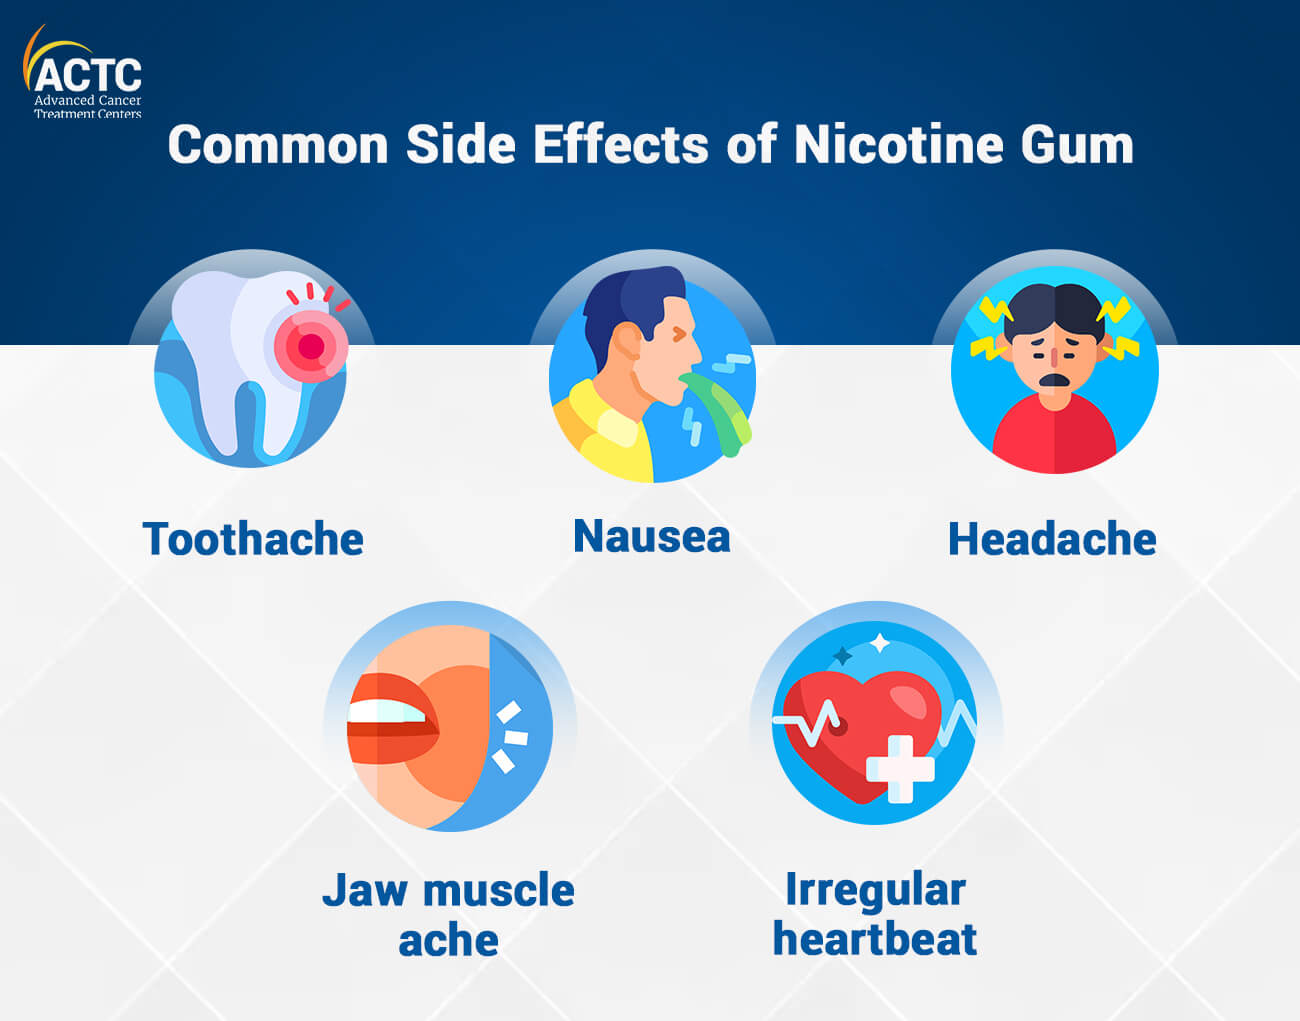 Can Nicotine Gum Cause Cancer